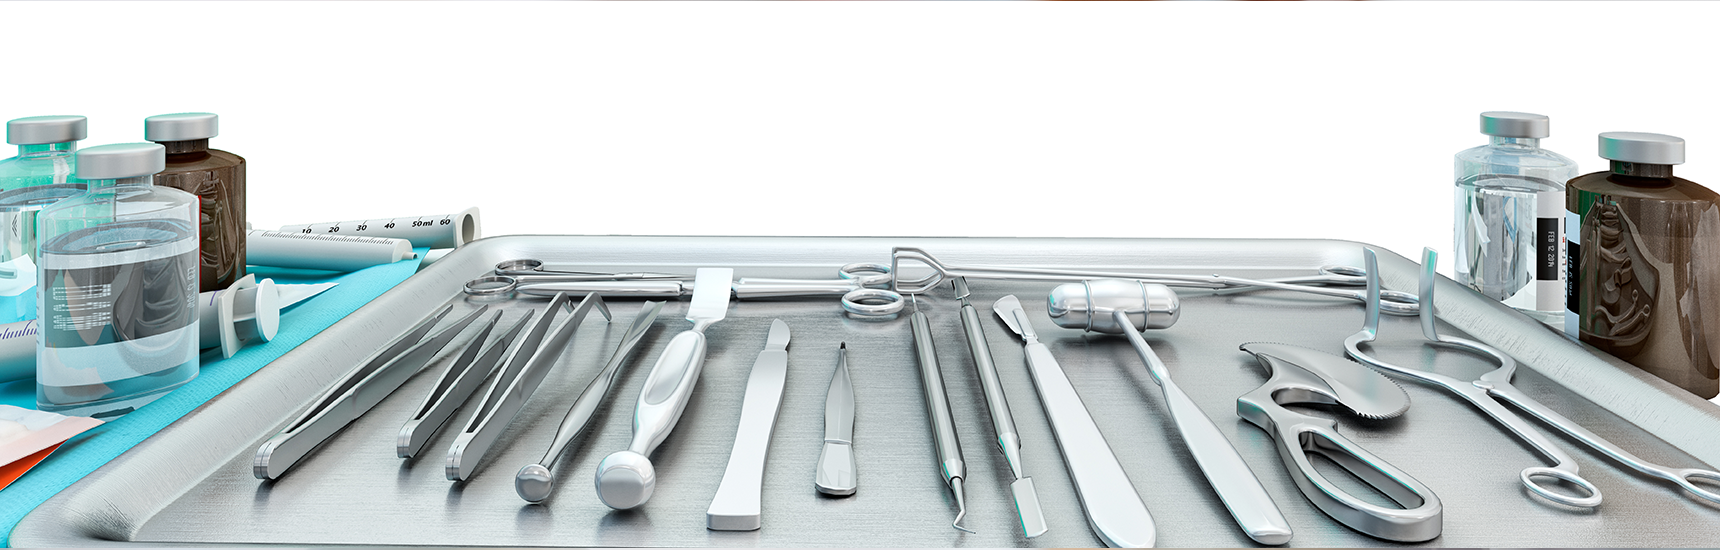 Surgical instruments on the Table 3d